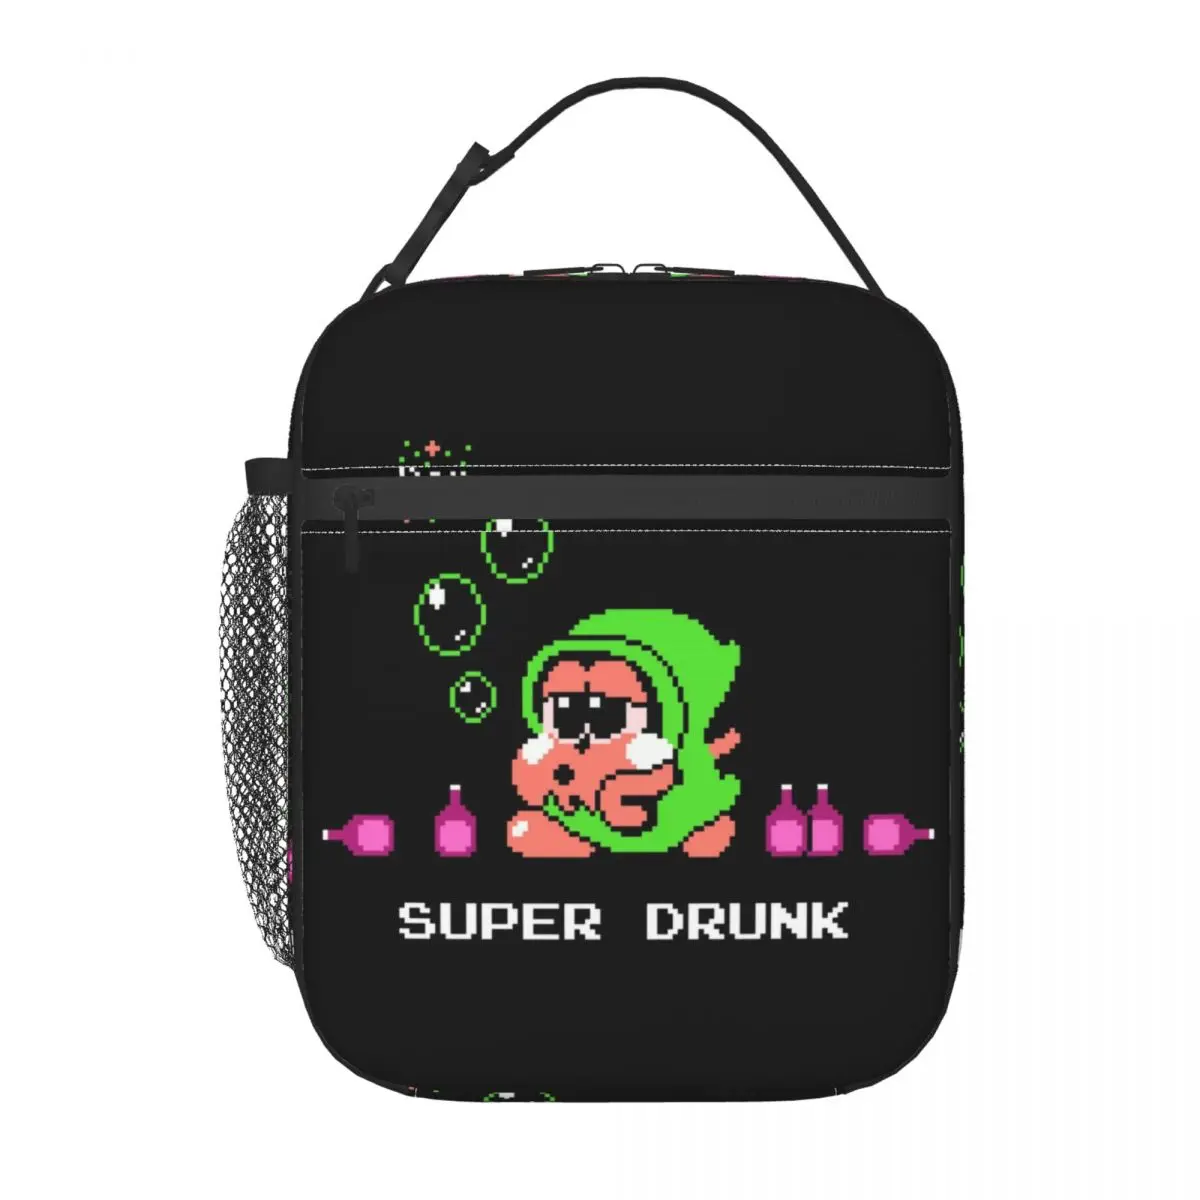 

Fighting Games Bubbles Bobble Super Drunk Insulated Lunch Bags Women Resuable Thermal Cooler Food Lunch Box Work School Travel